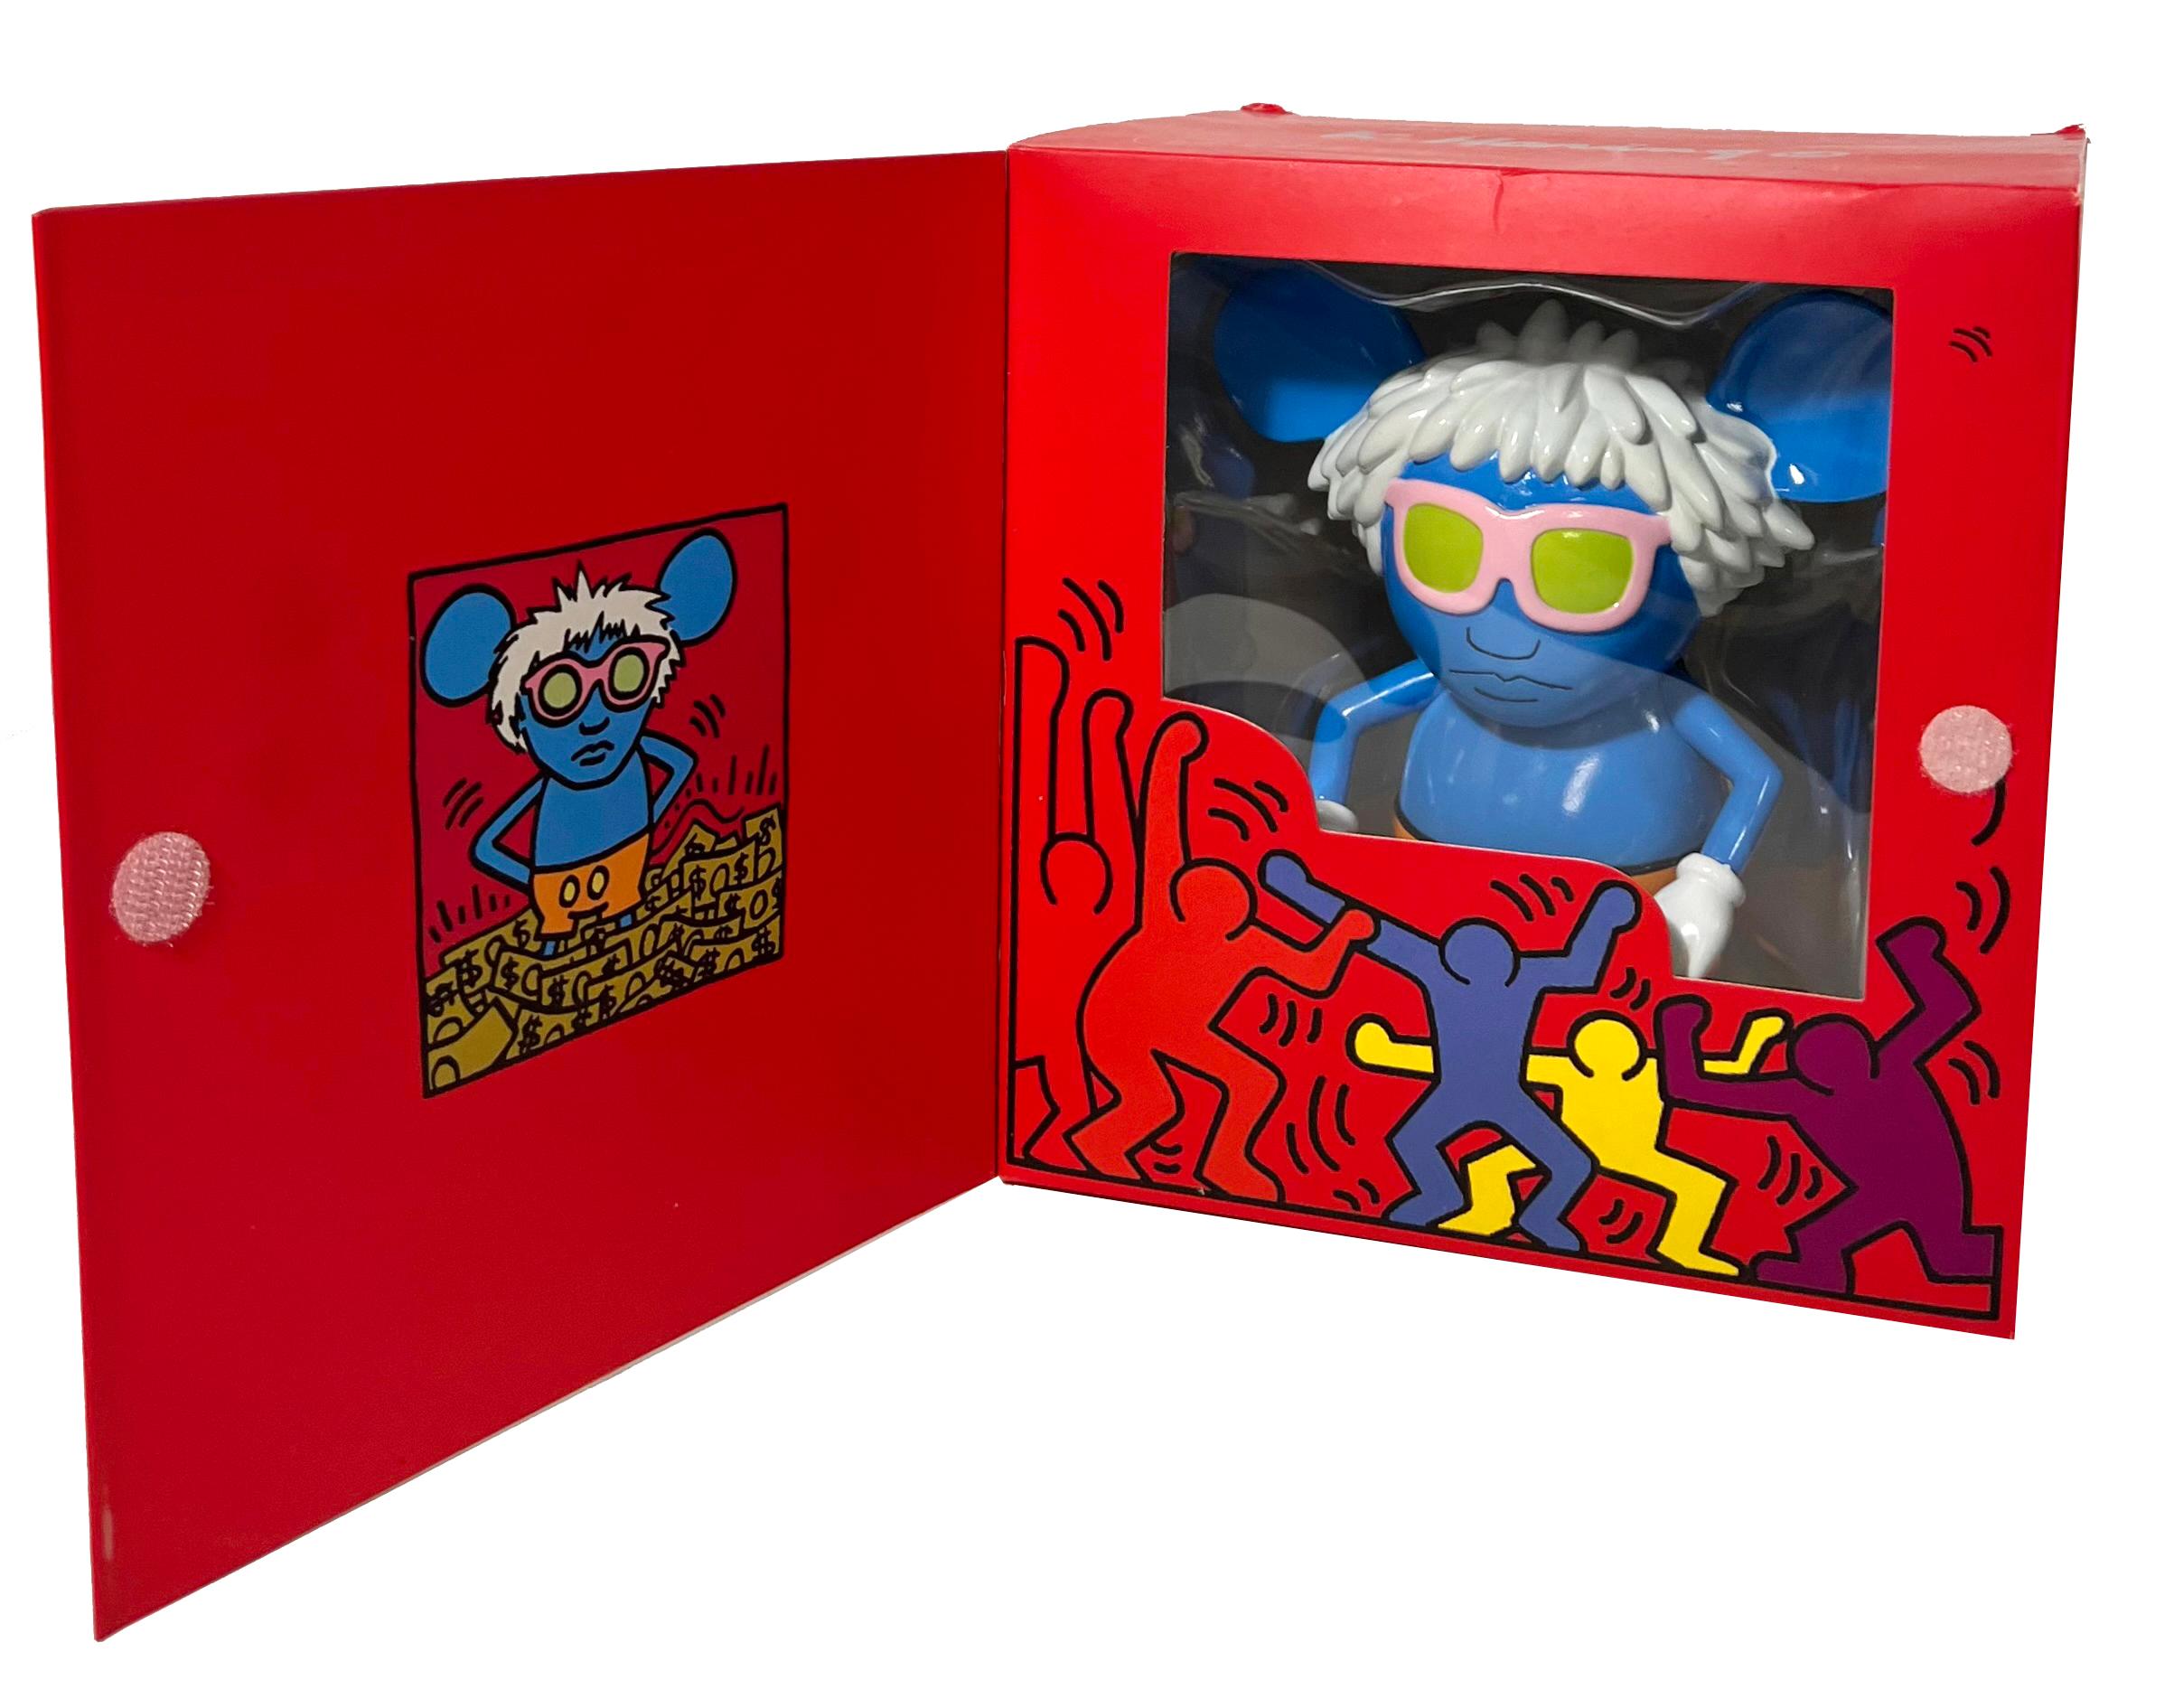 Keith Haring Andy Mouse art toy (Keith Haring Andy Warhol)  - Pop Art Print by (after) Keith Haring